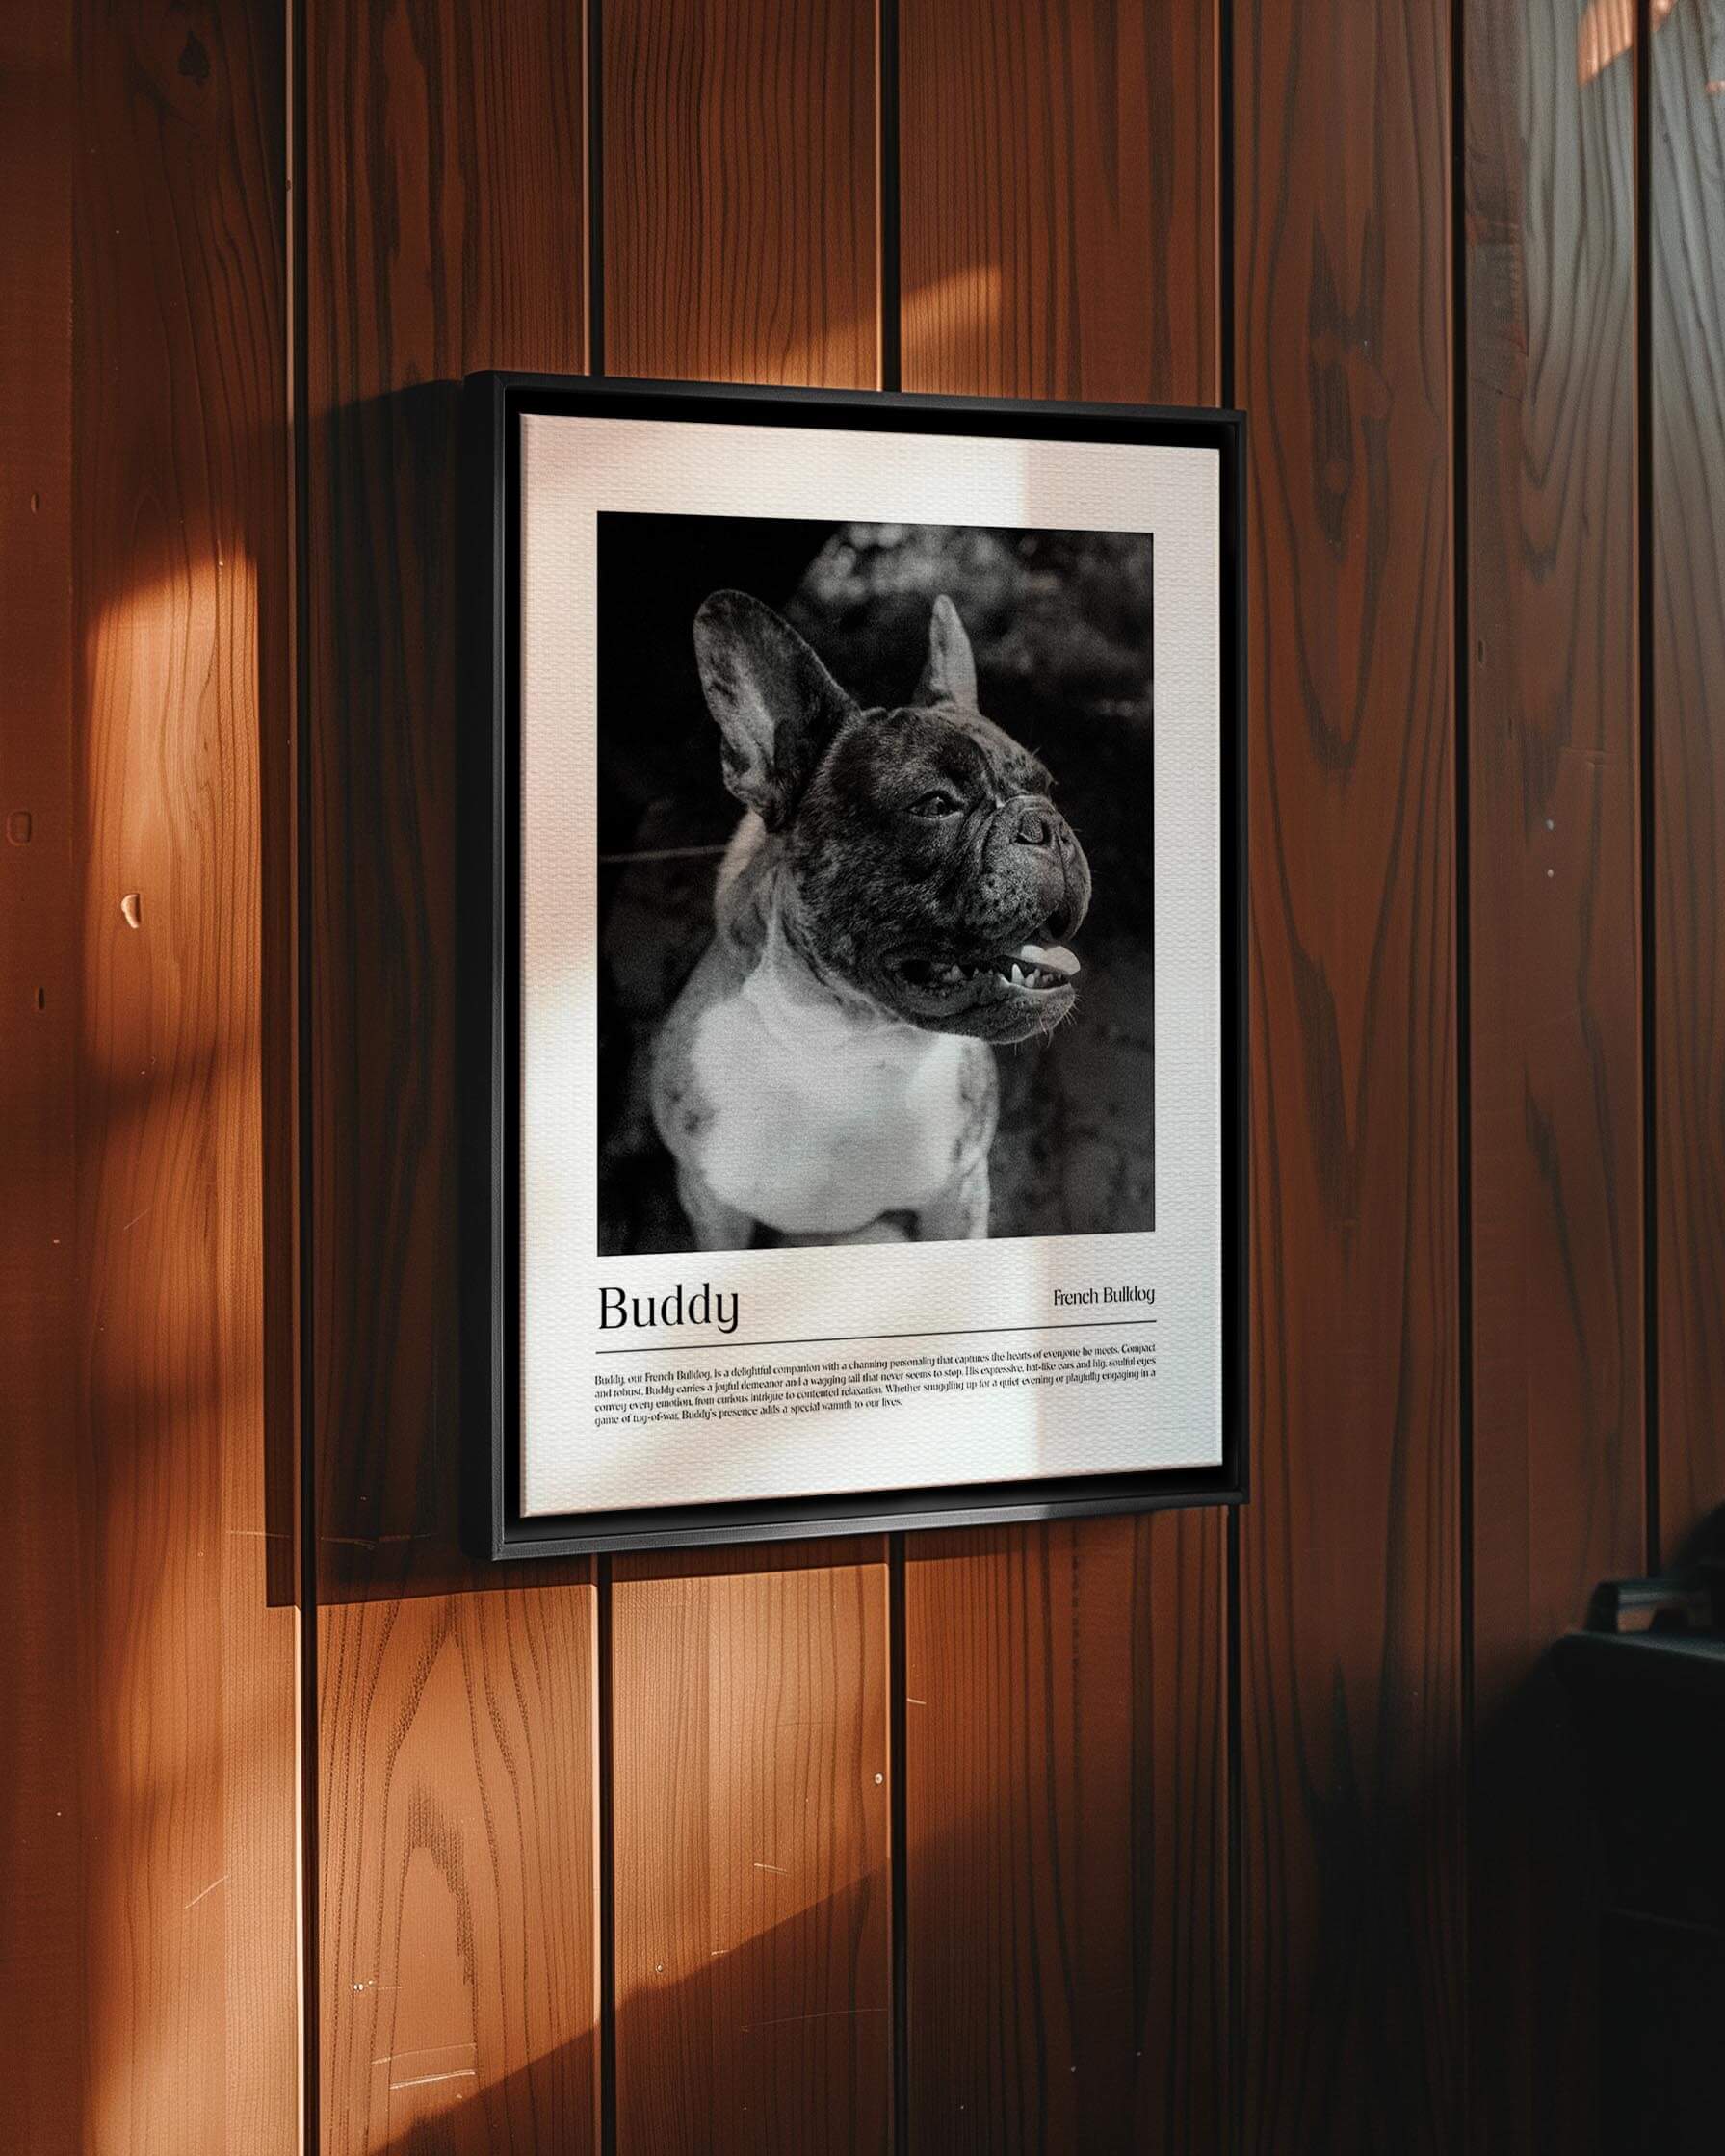 French bulldog photo printed as black and white art and custom framed and personalized in modern home decor setting making a unique custom gift for dog mom and dog dad pet parents created by vogue paws personalized pet portraits